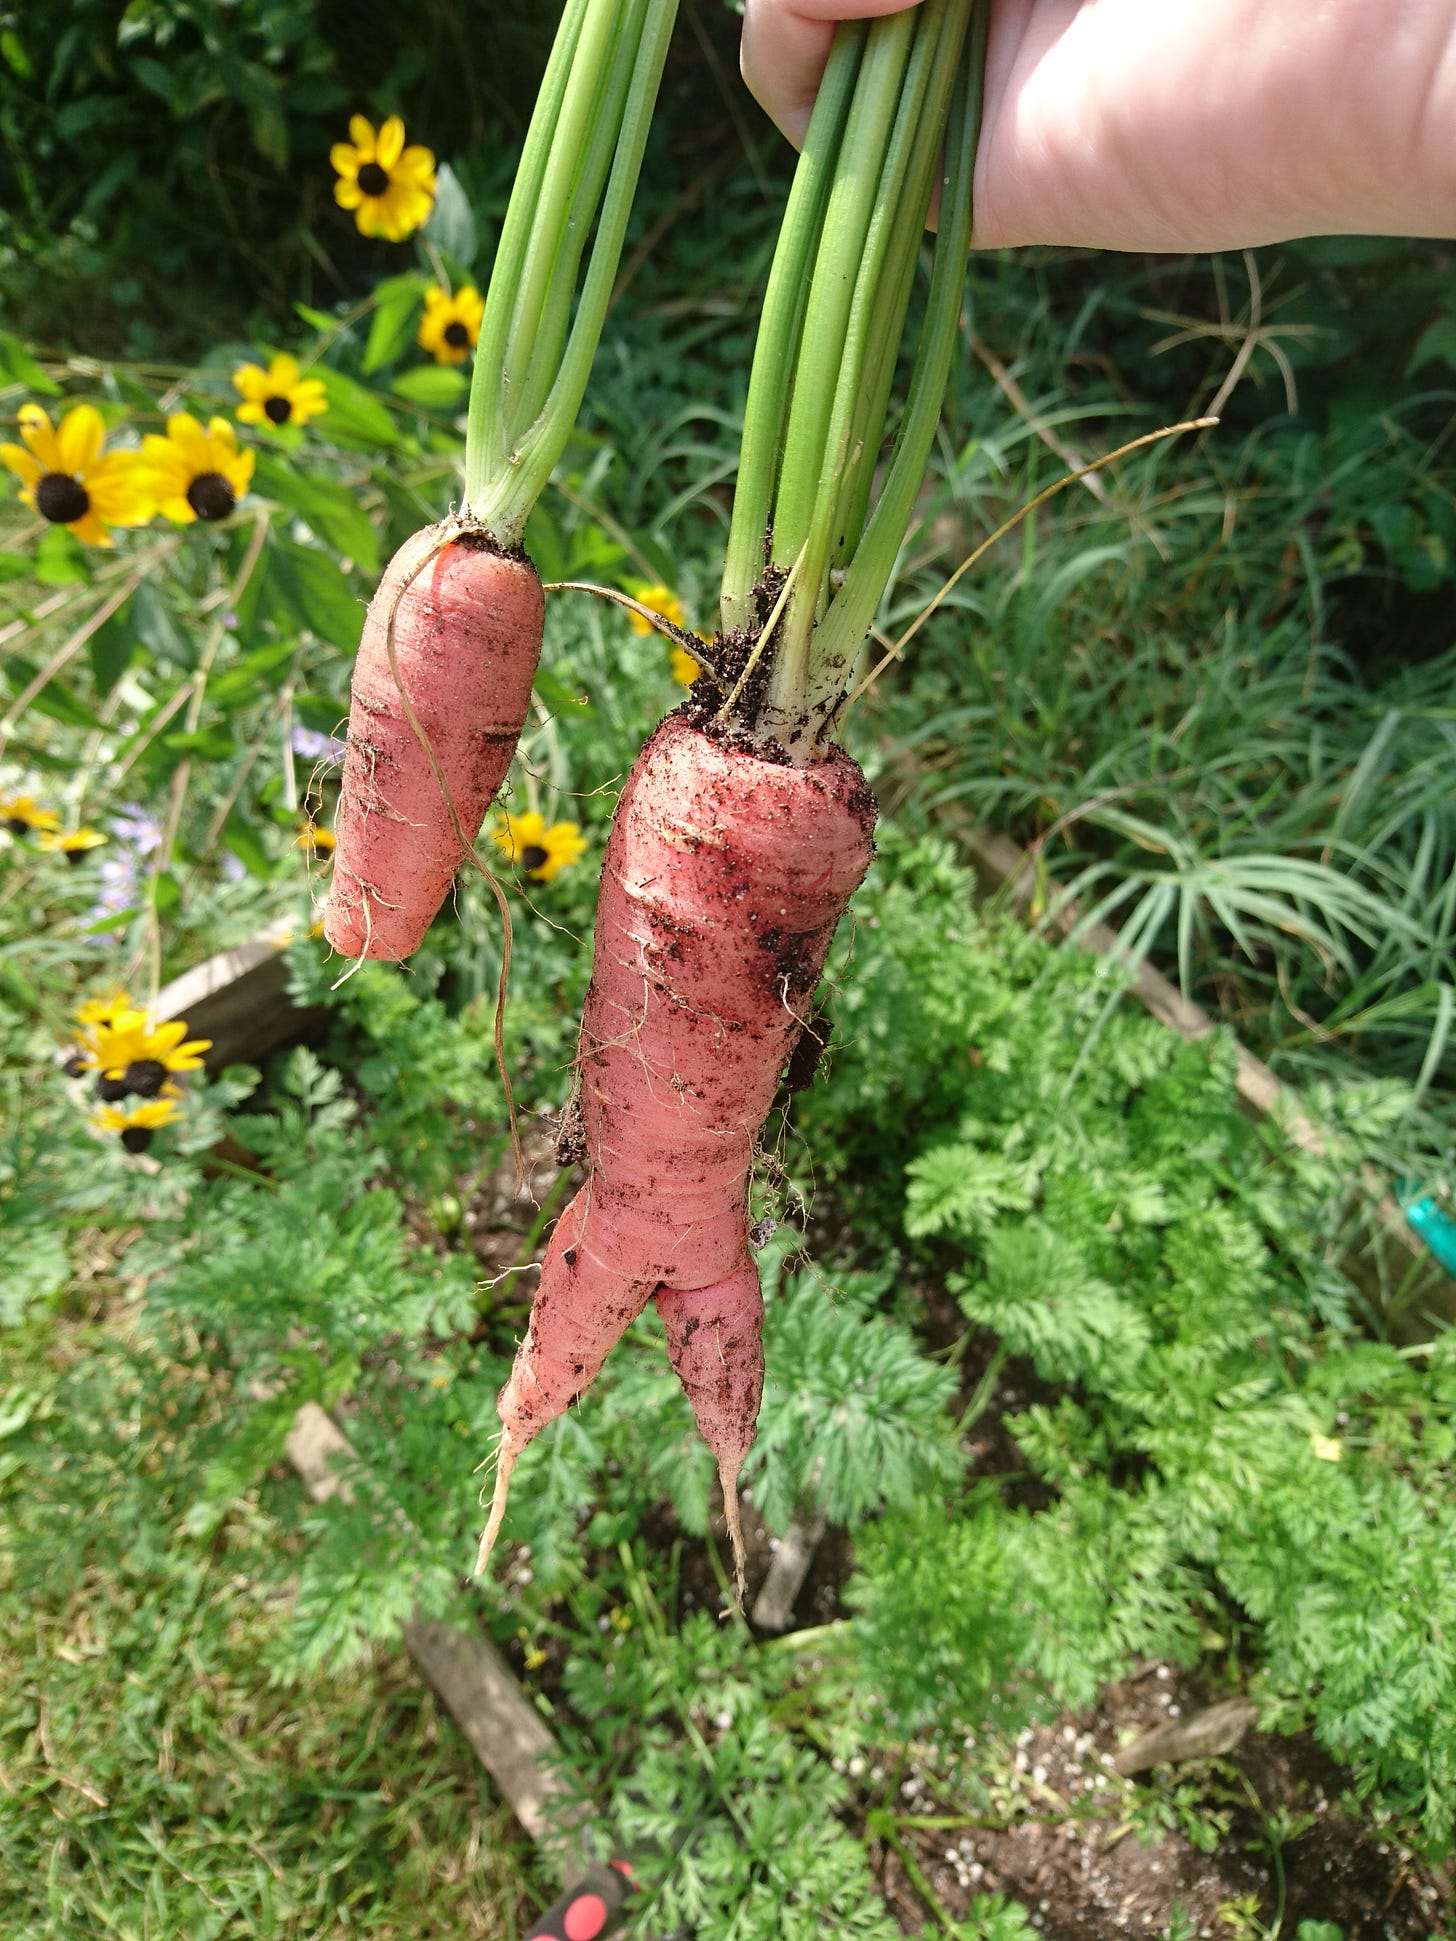 Two orange carrots dangle from a clenched fist. They are lightly covered in dark soil.